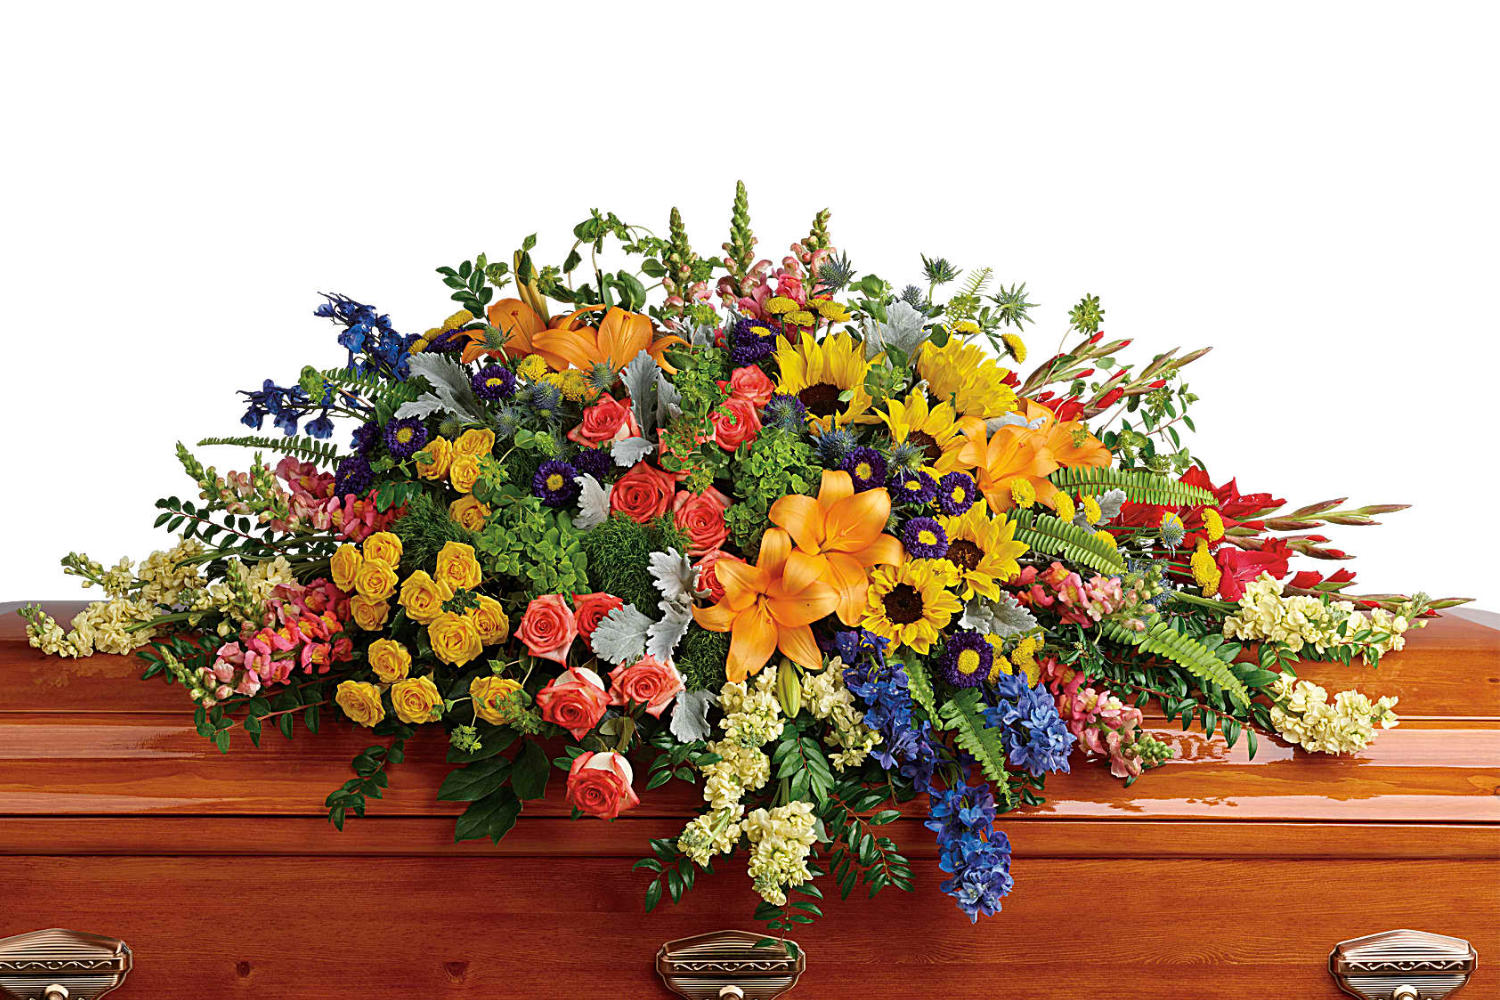 a casket spray with very colorful flowers, red, yellor and pink roses,  sunflowers, ferns, lilies and a bunch of other flowers in this beautiful funeral flower arrangement